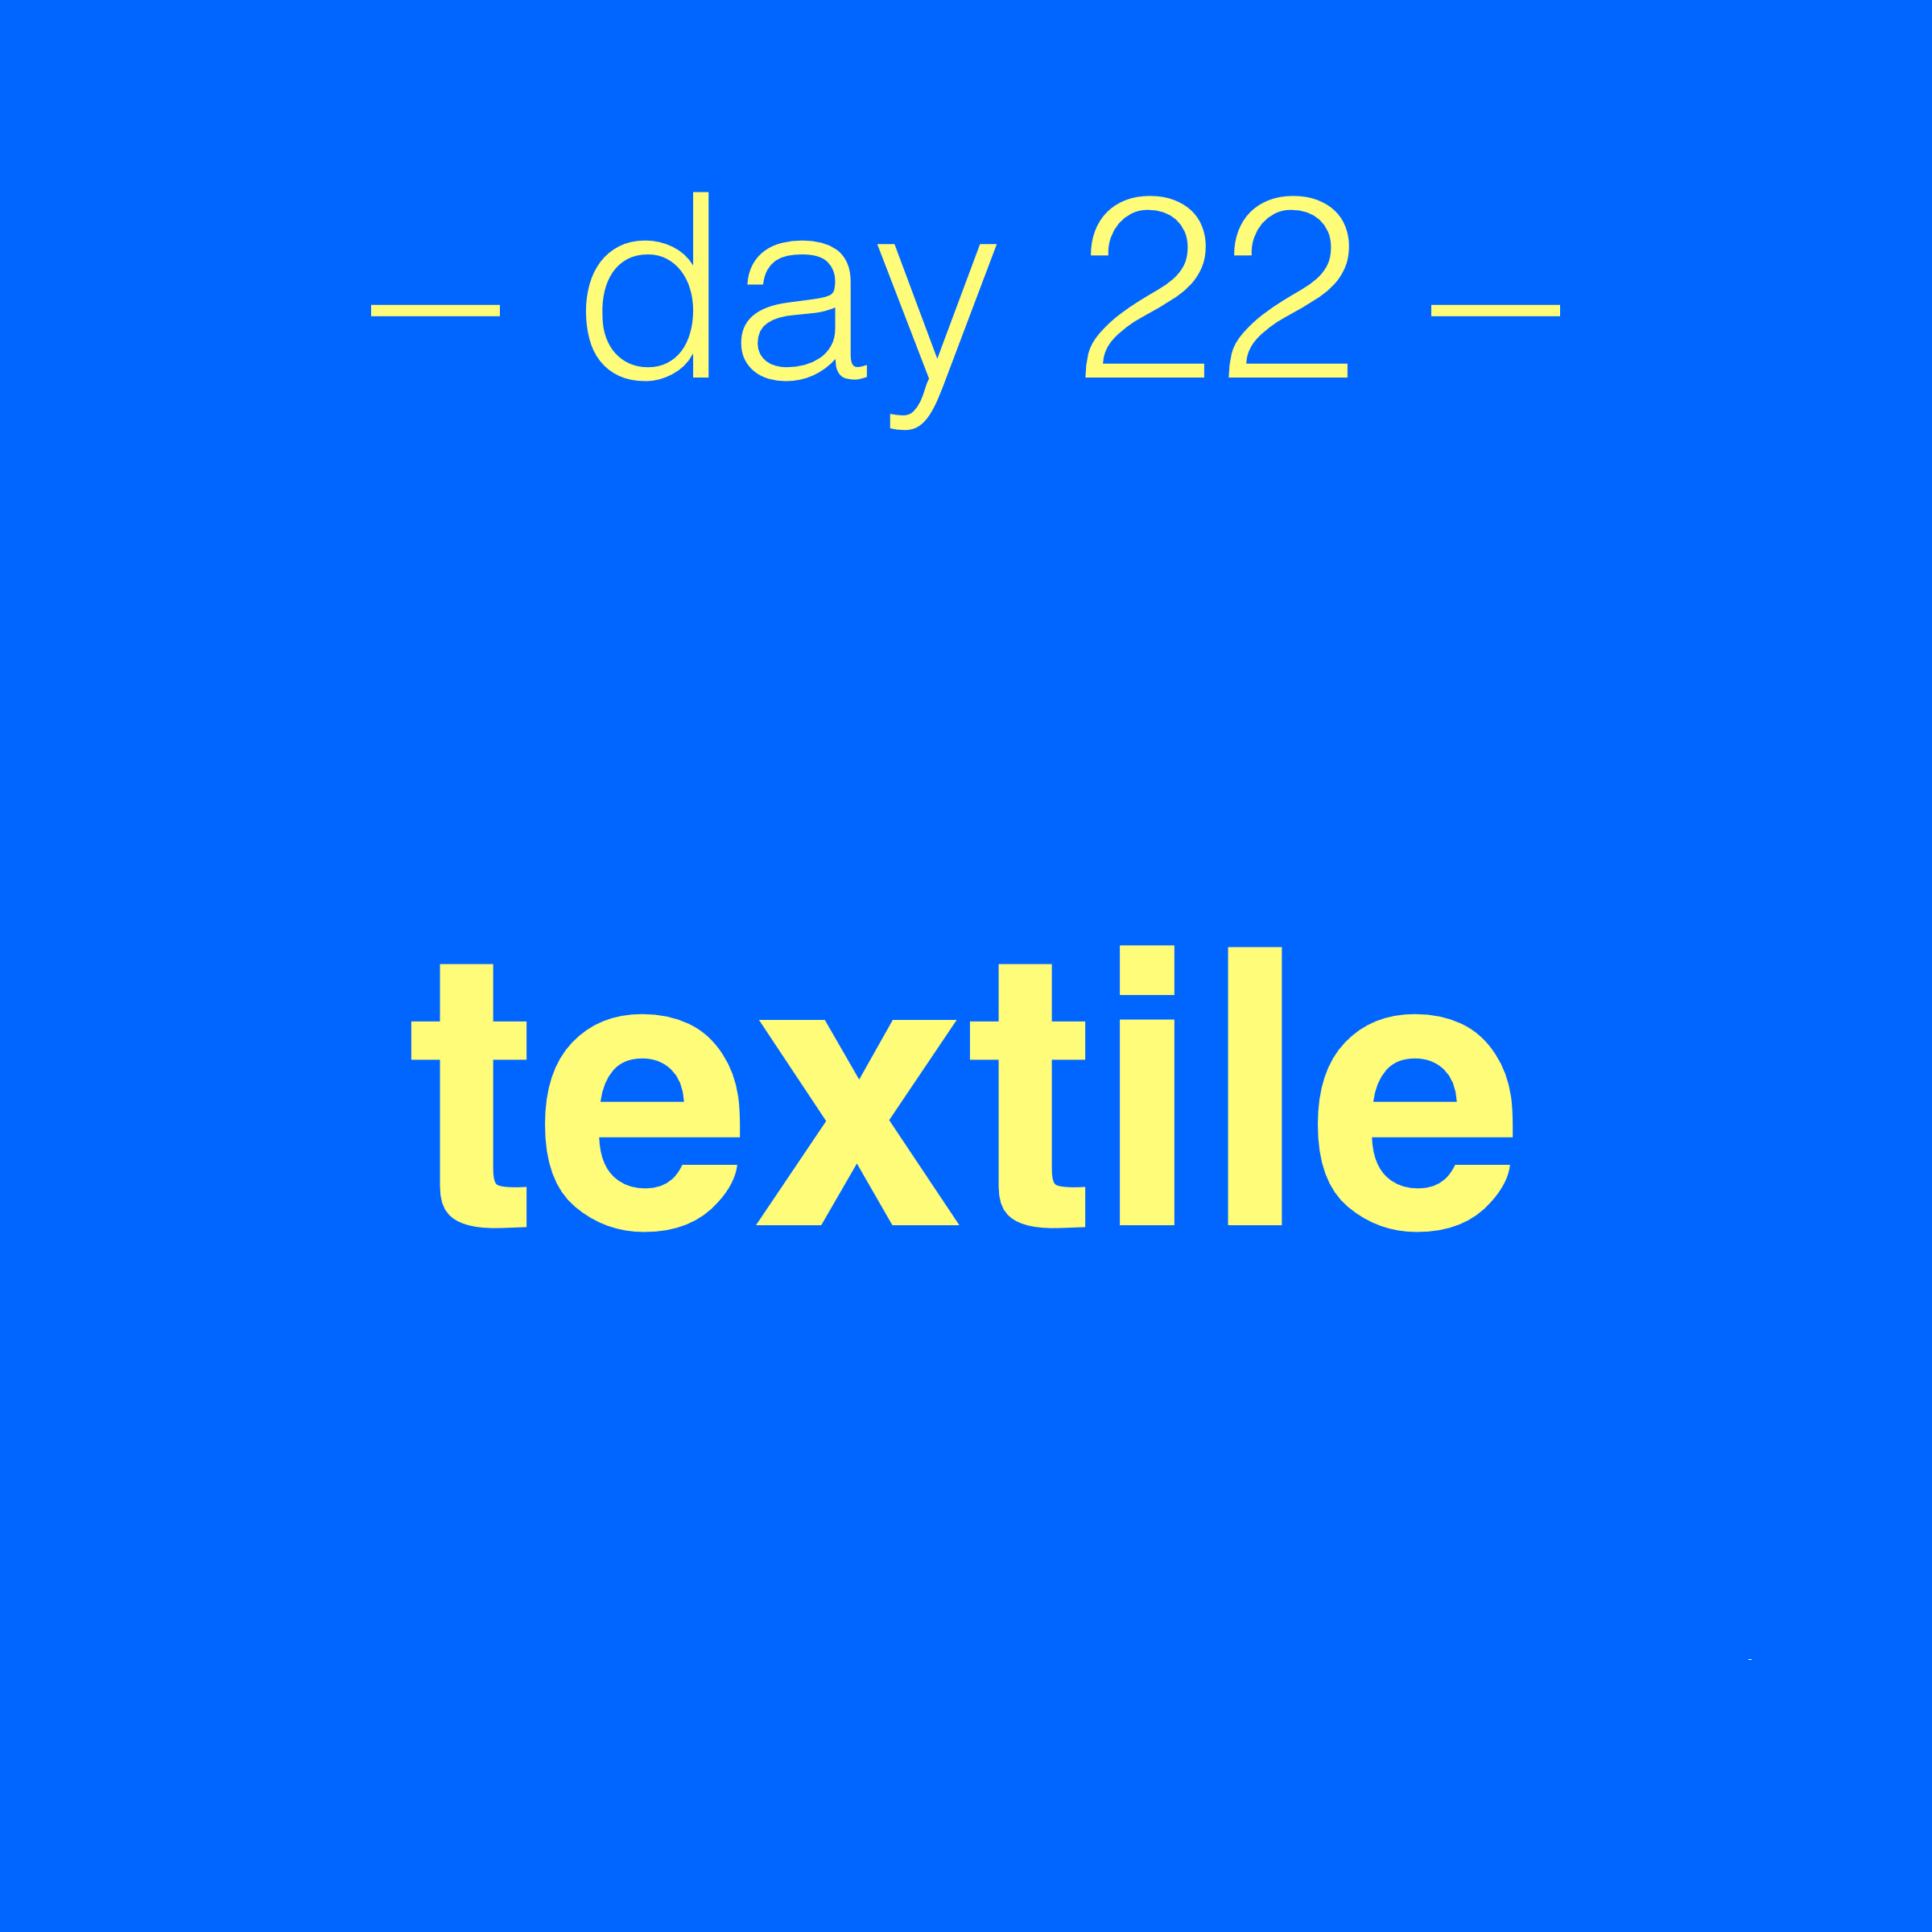 Challenge graphic: day 22 textile